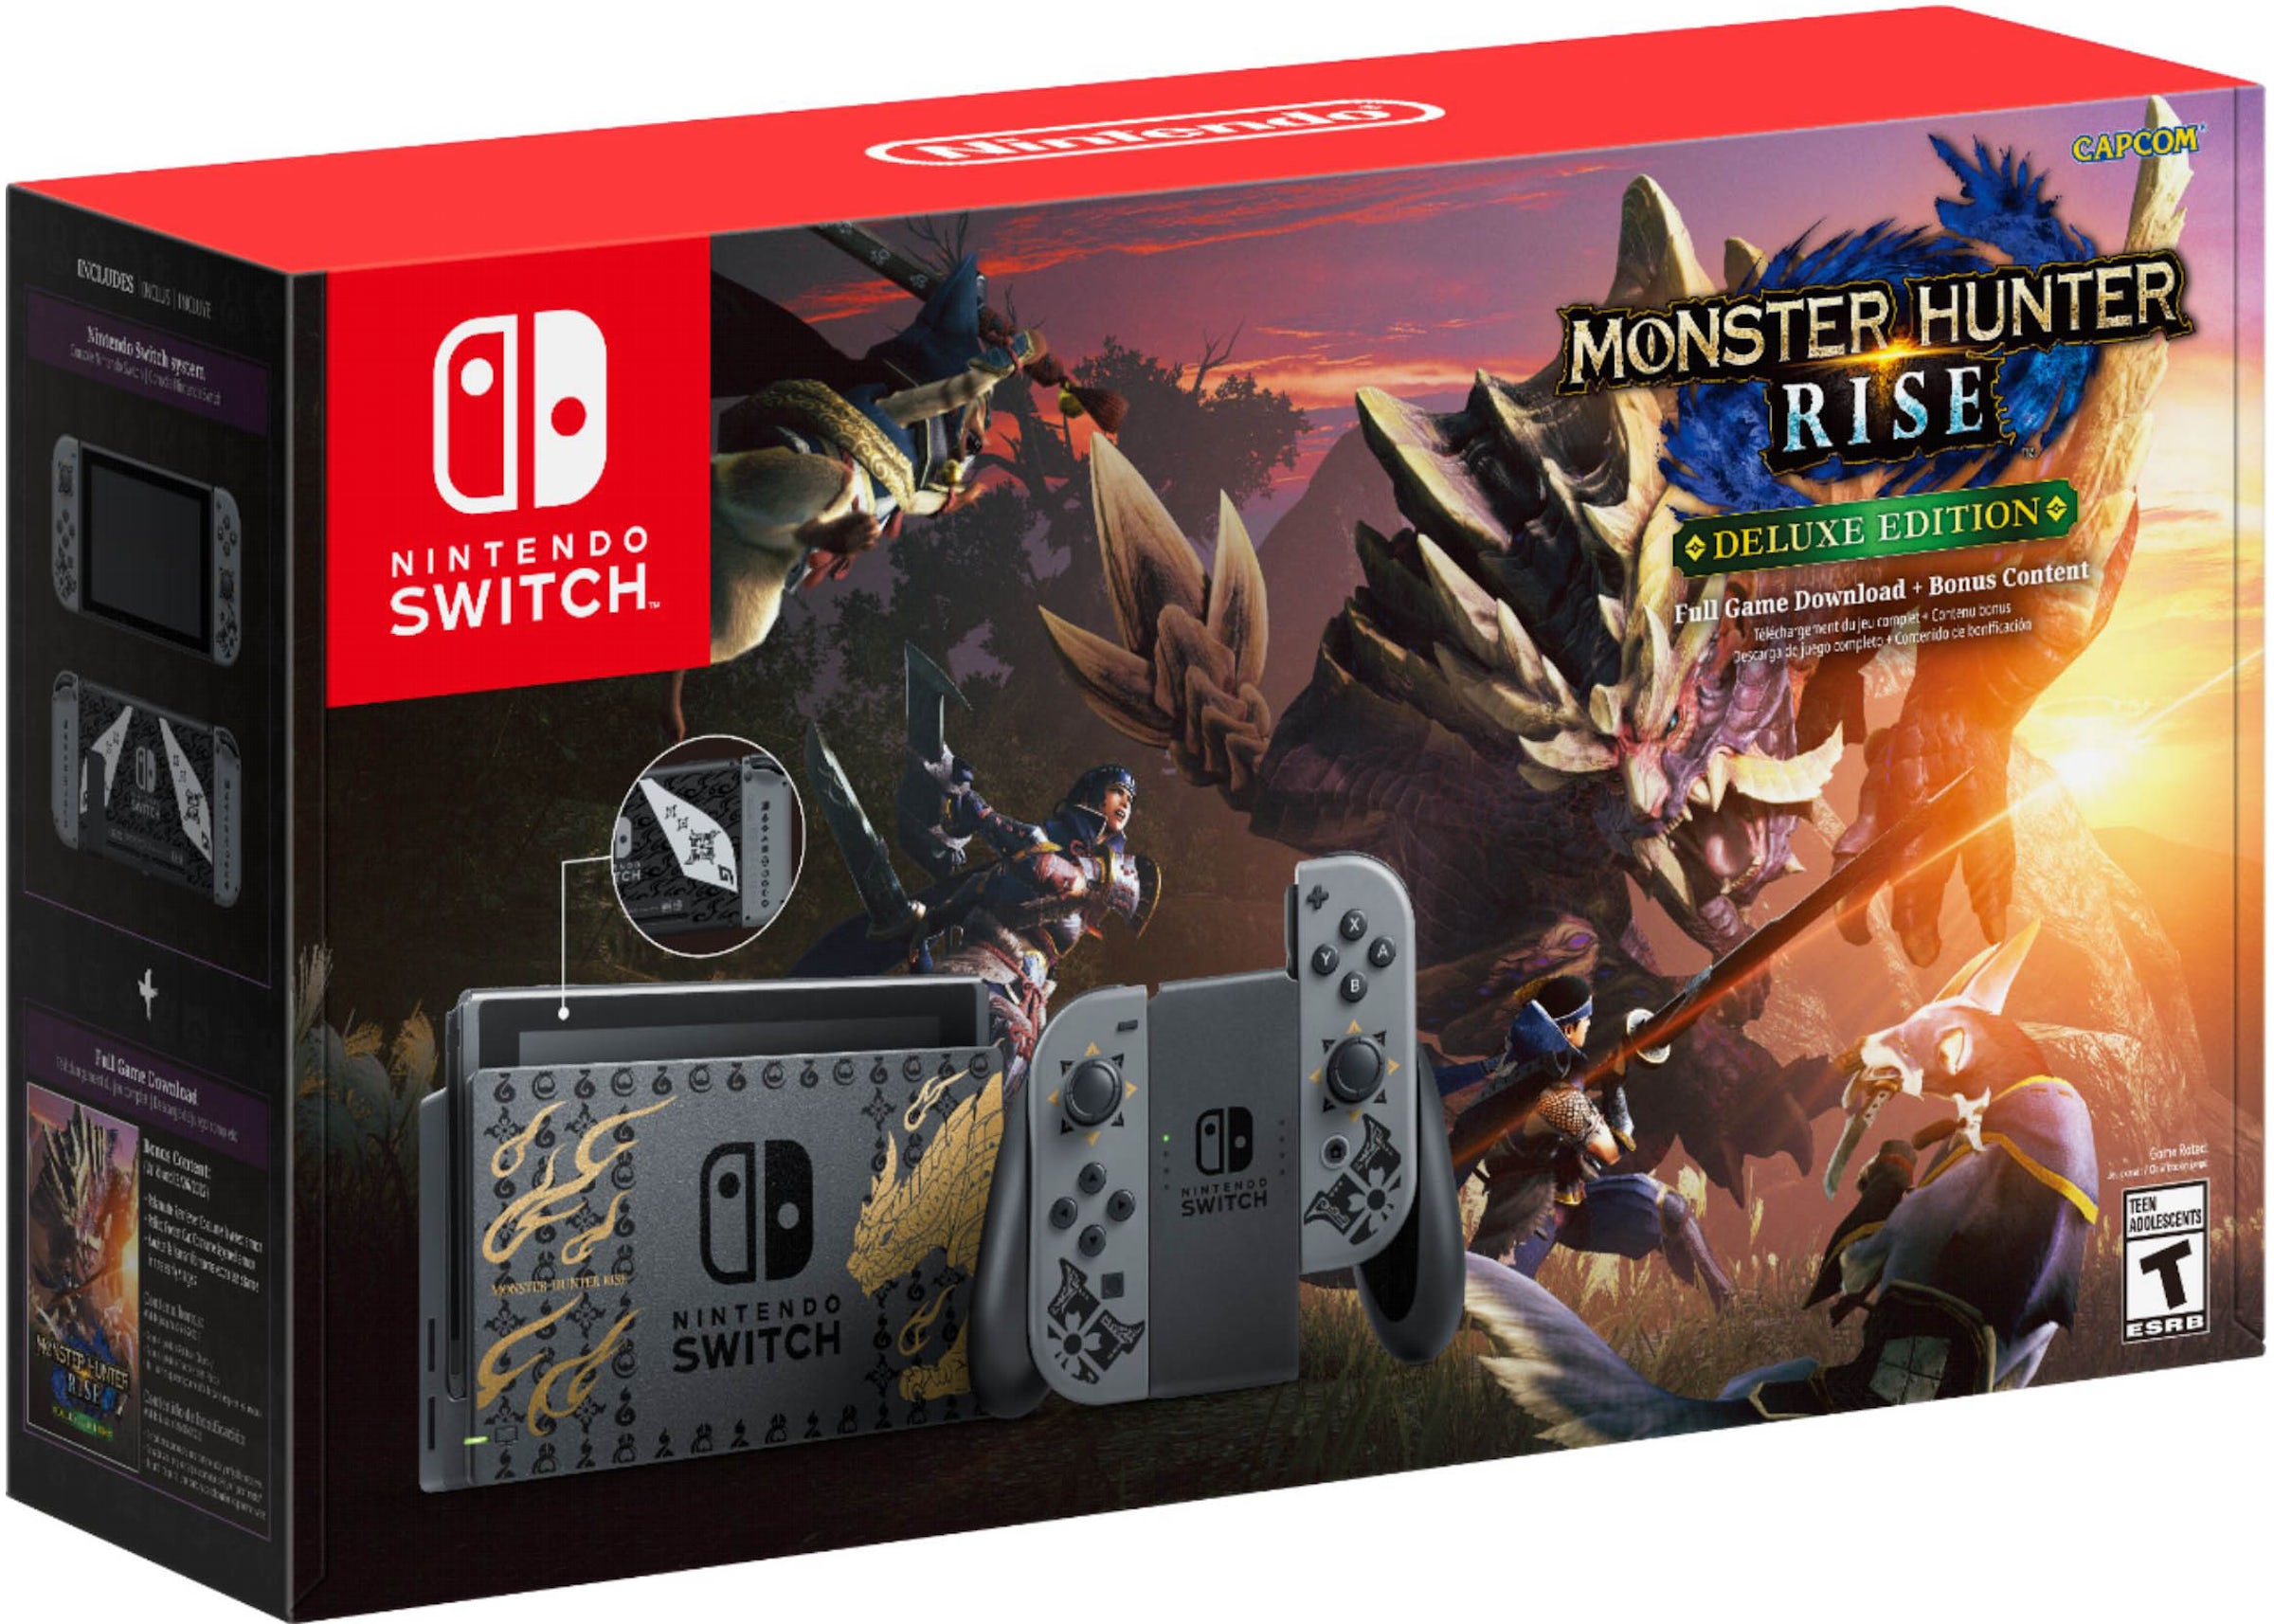 Nintendo Switch Monster Hunter Rise Deluxe Edition System HADSKGALG Grey -  US